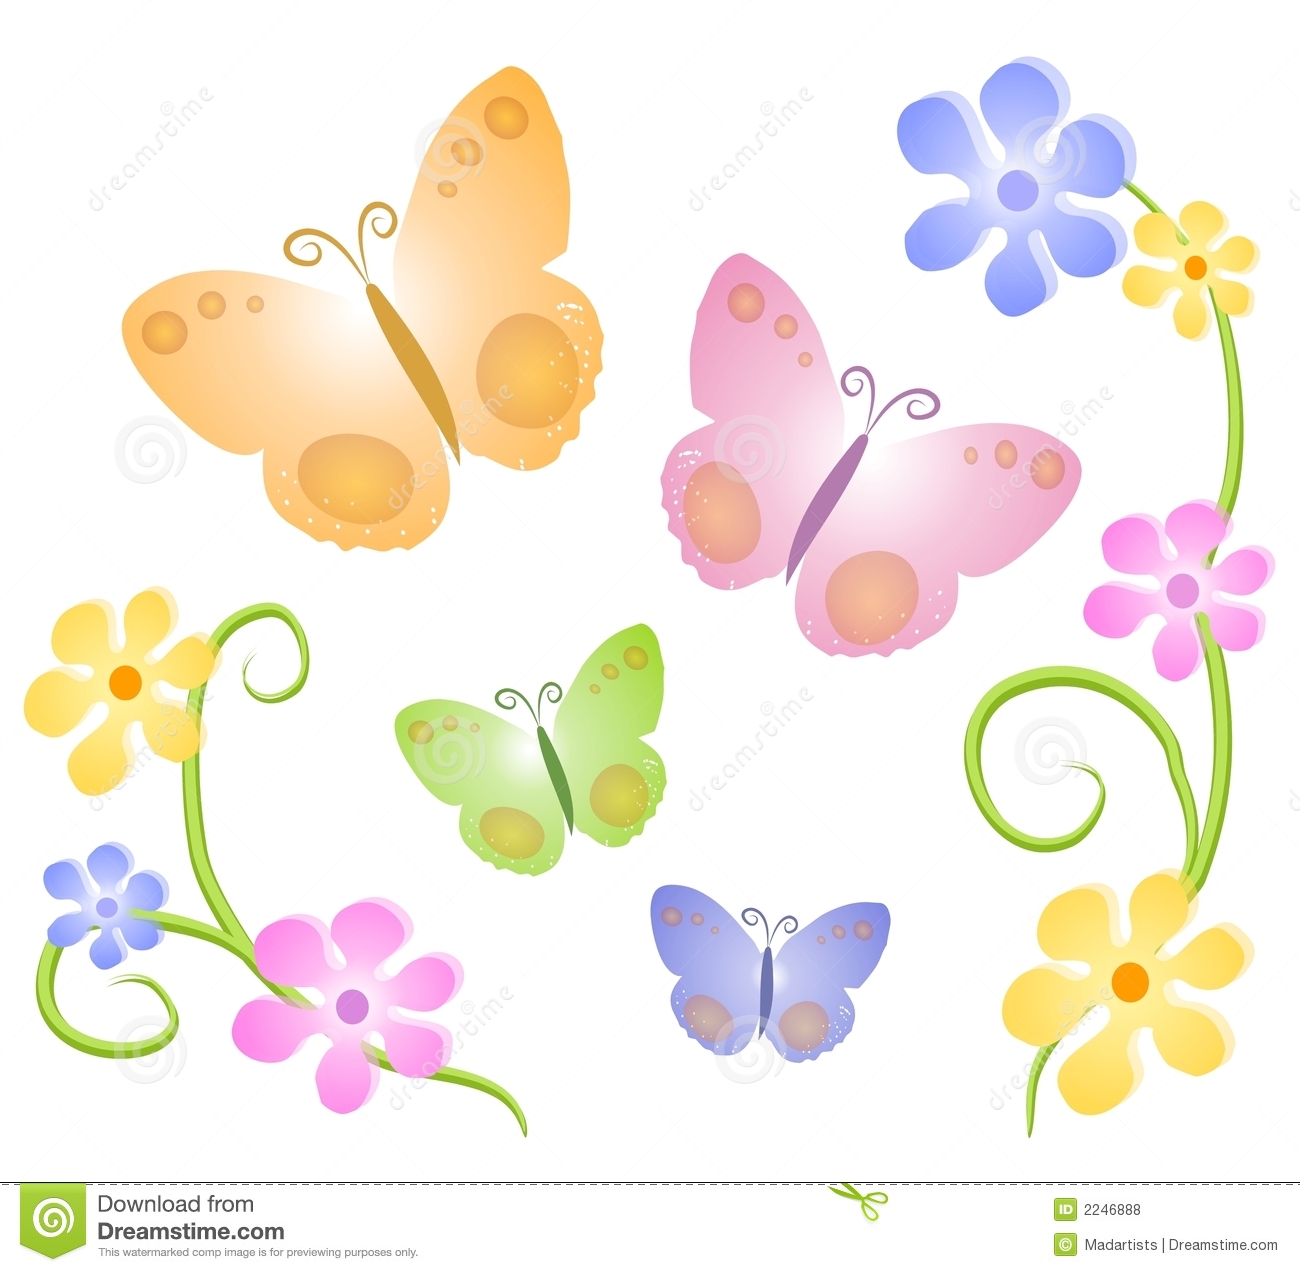 Butterfly clipart free clipar